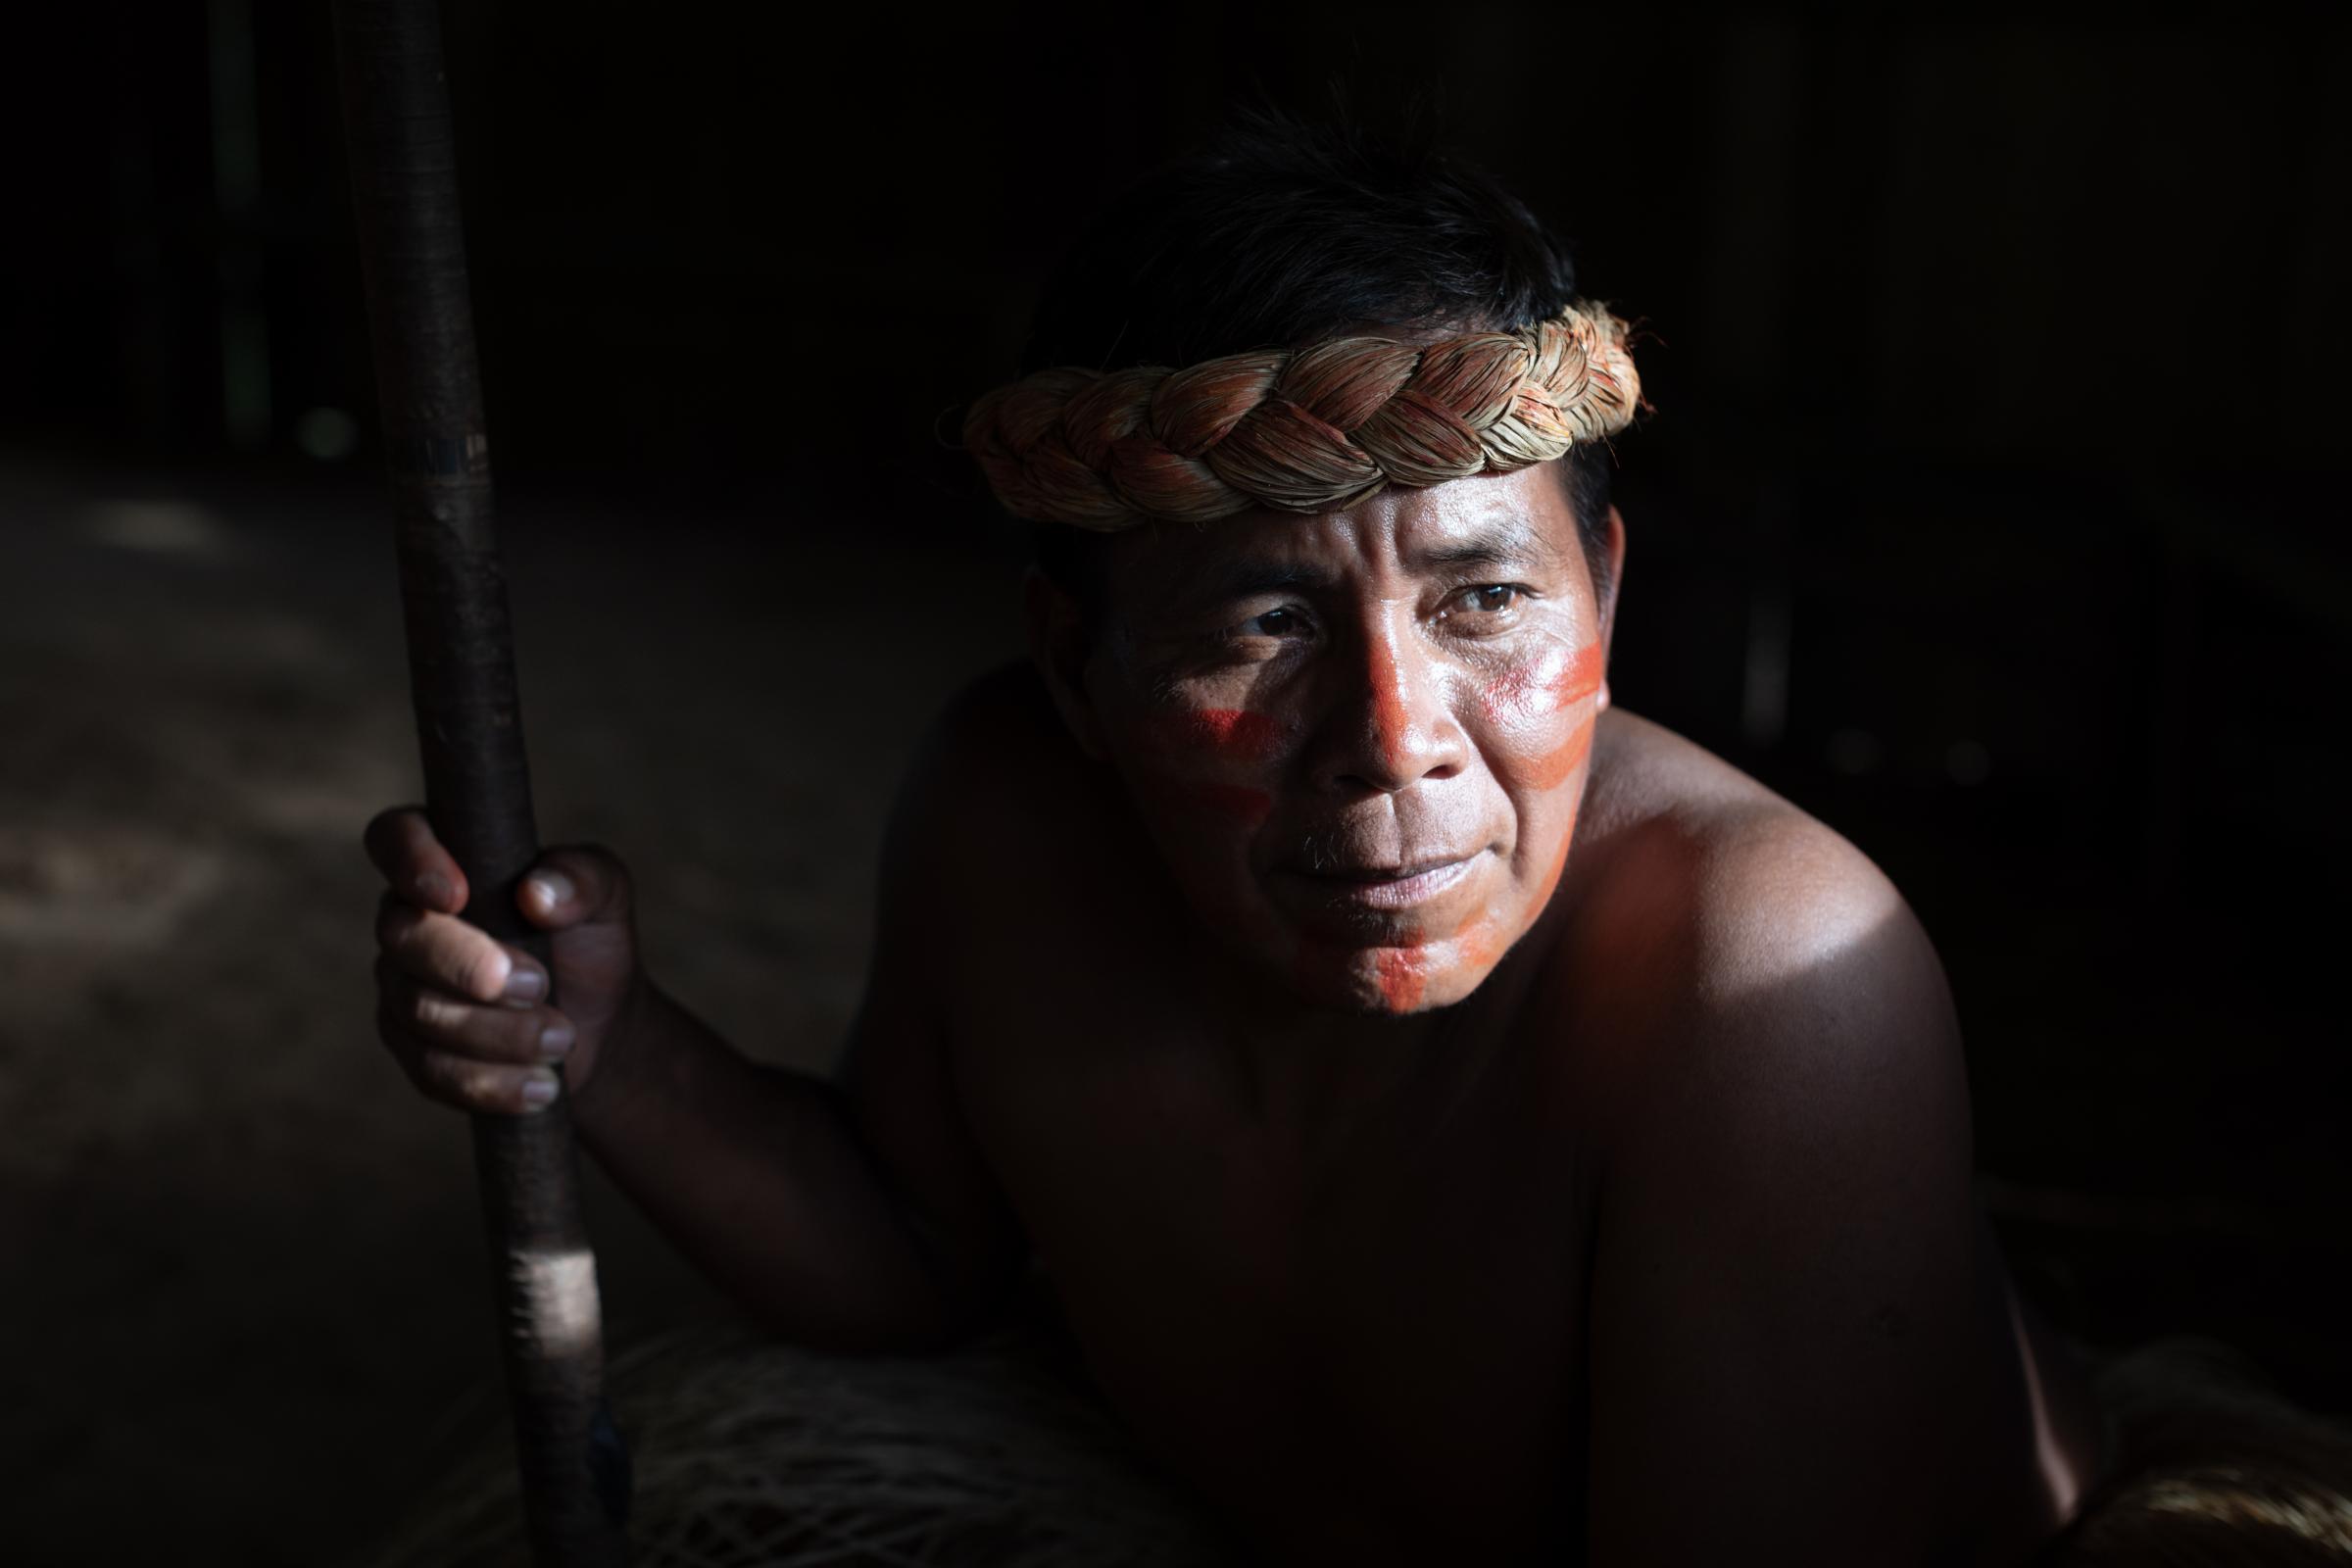 Vaccinators in Peru's Amazon are challenged by religion, rivers and a special tea - Ricardo Roque (47) leader of the Nueva Vida Yahuas indigenous Amazon community in Iquitos, Peru.